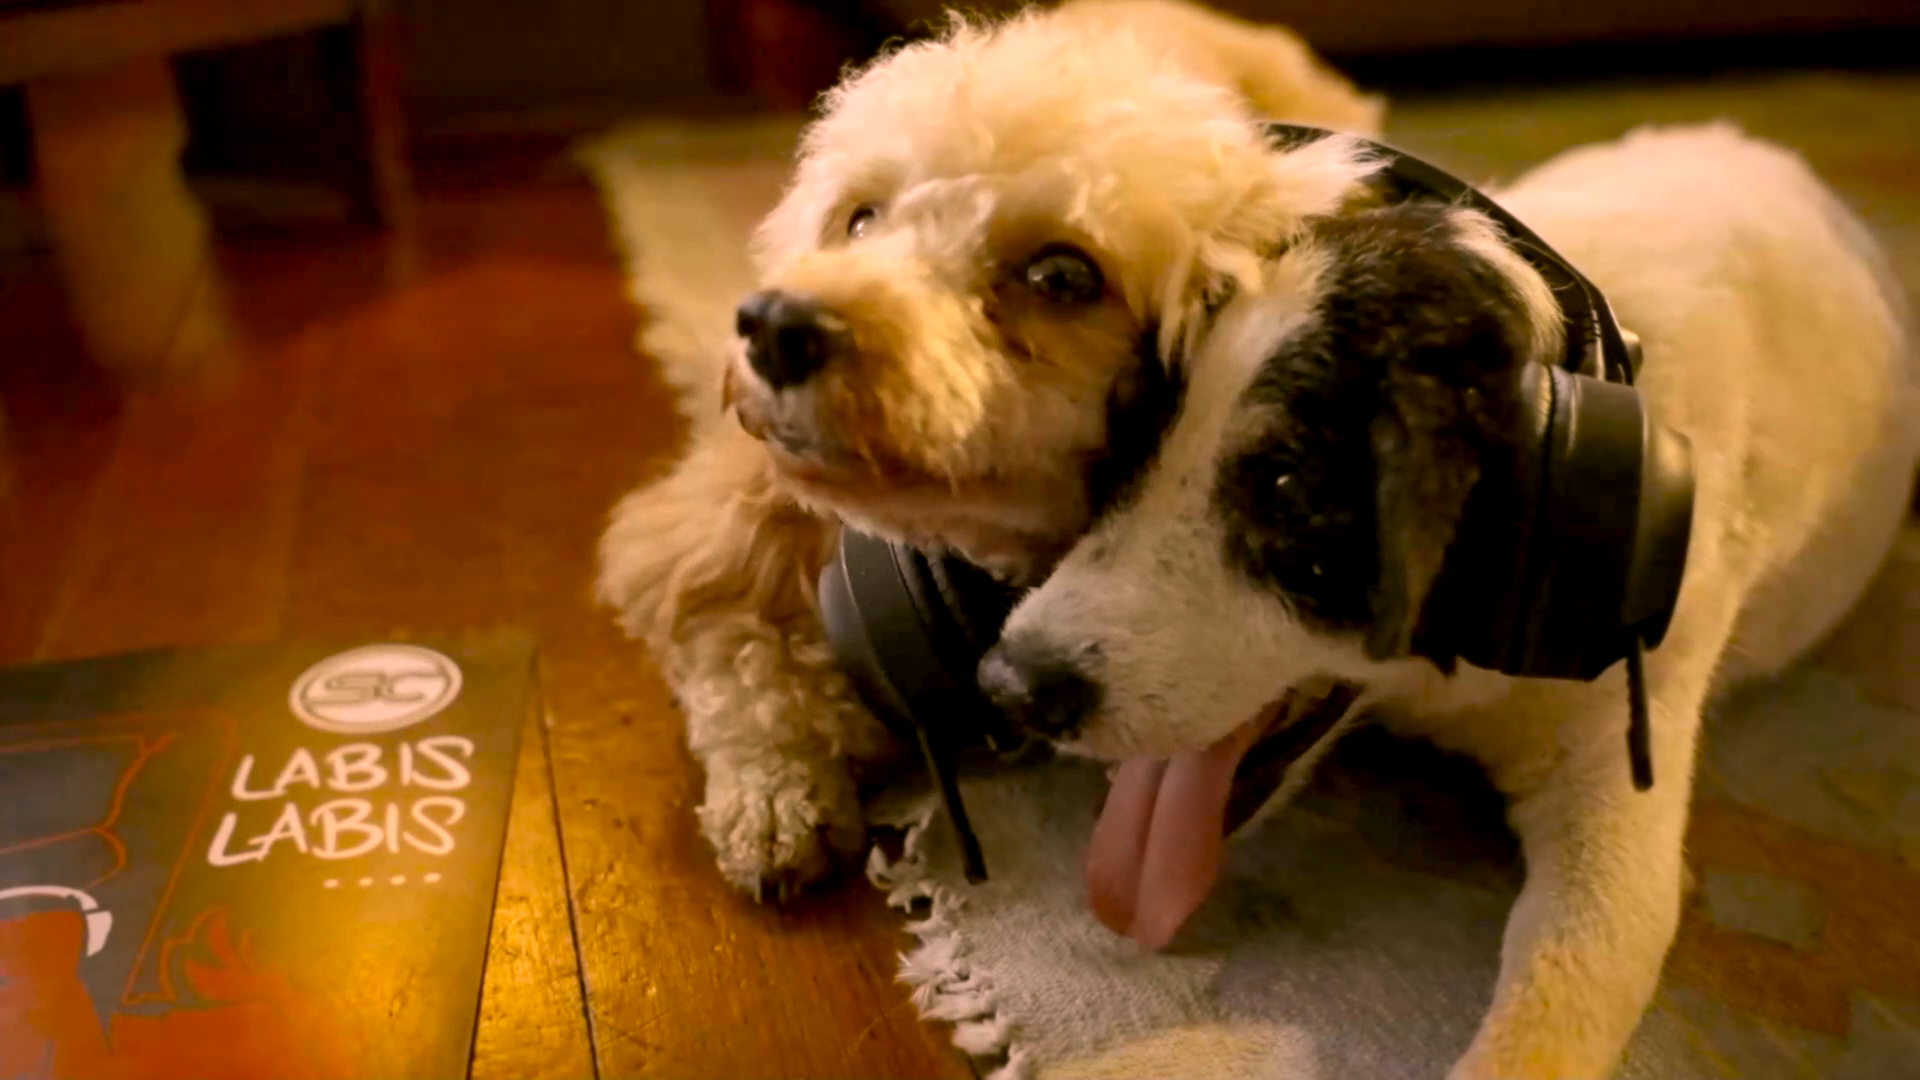 Two puppies star in the rom-com music video of Sponge Cola’s ‘Labis-labis’